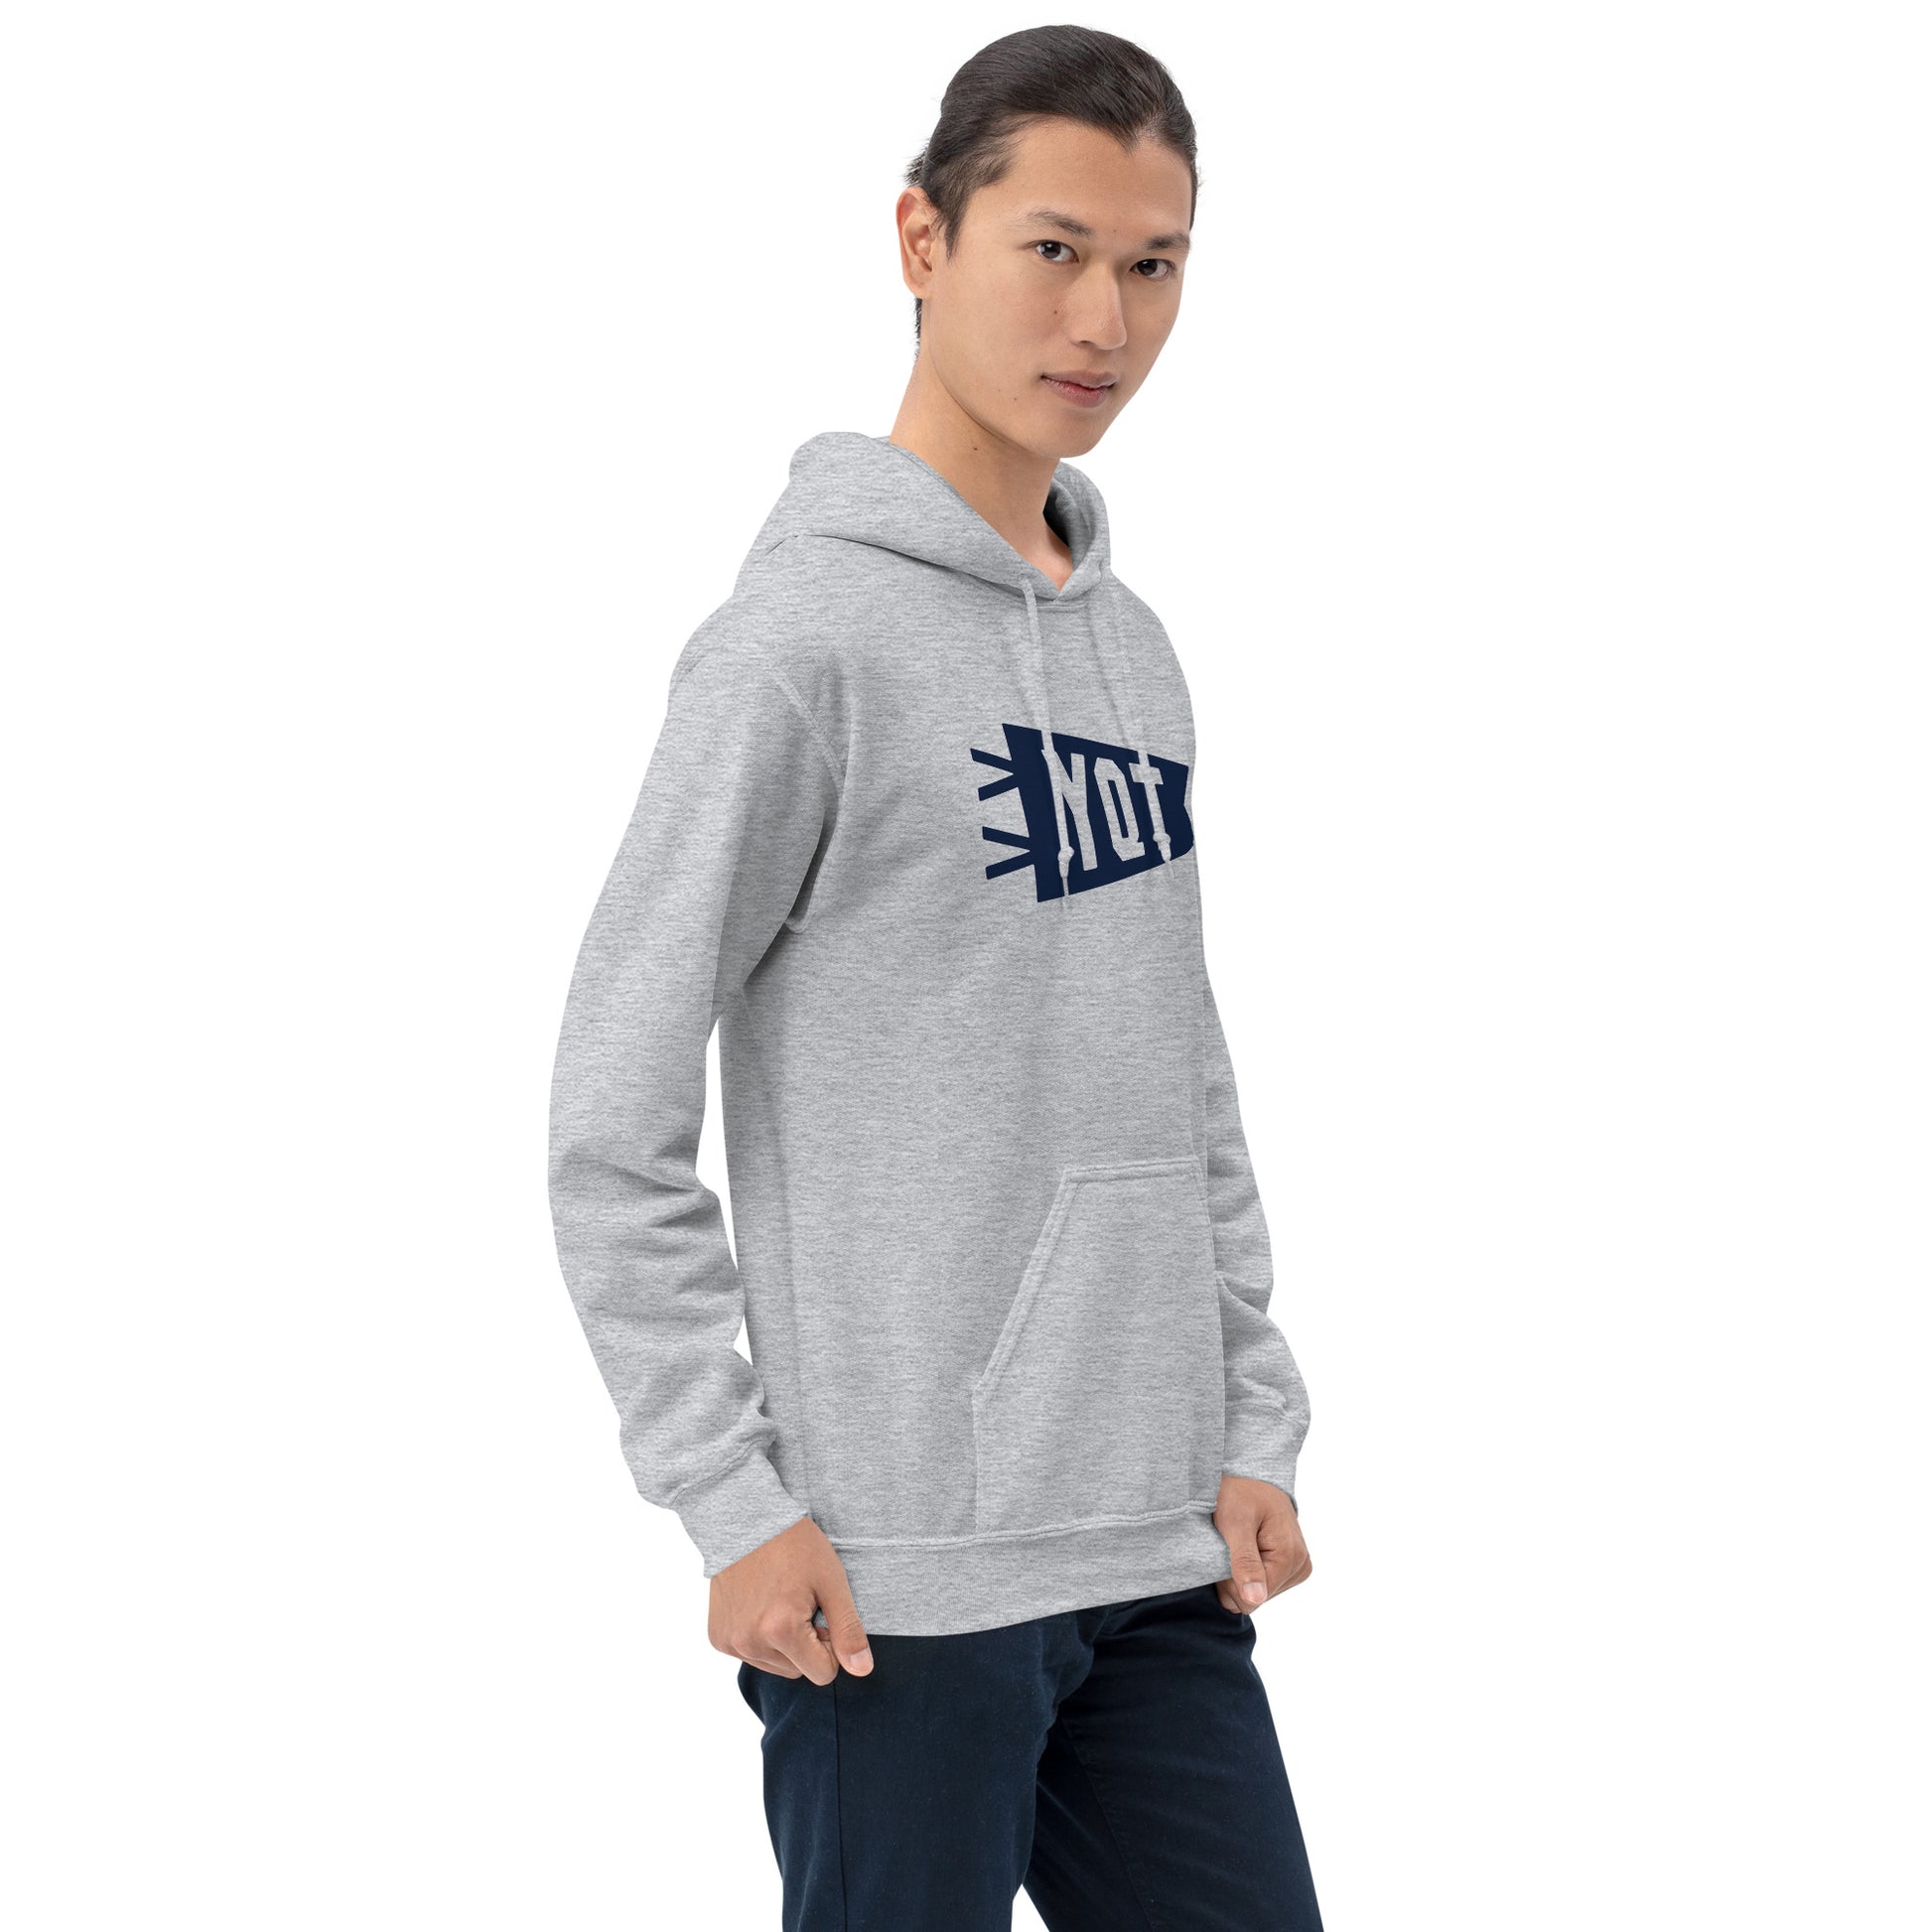 Airport Code Unisex Hoodie - Navy Blue Graphic • YQT Thunder Bay • YHM Designs - Image 09